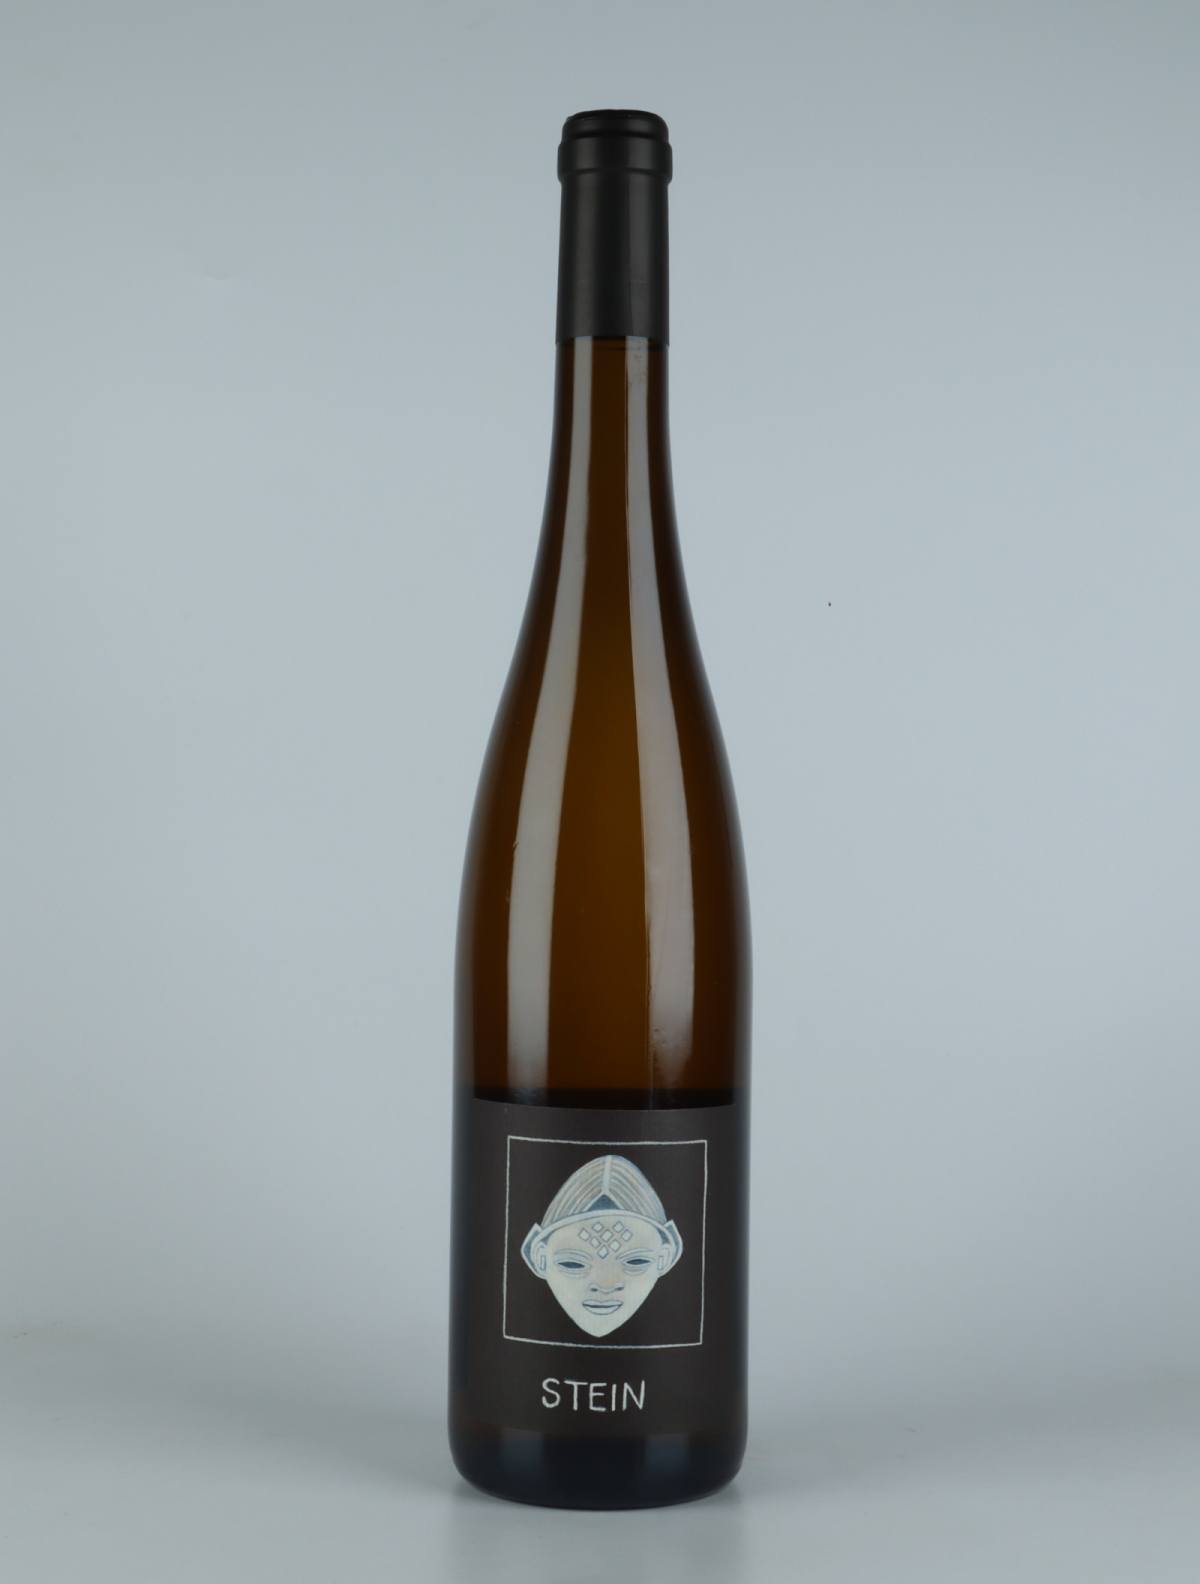 A bottle 2019 Riesling - Stein White wine from Domaine Rietsch, Alsace in France